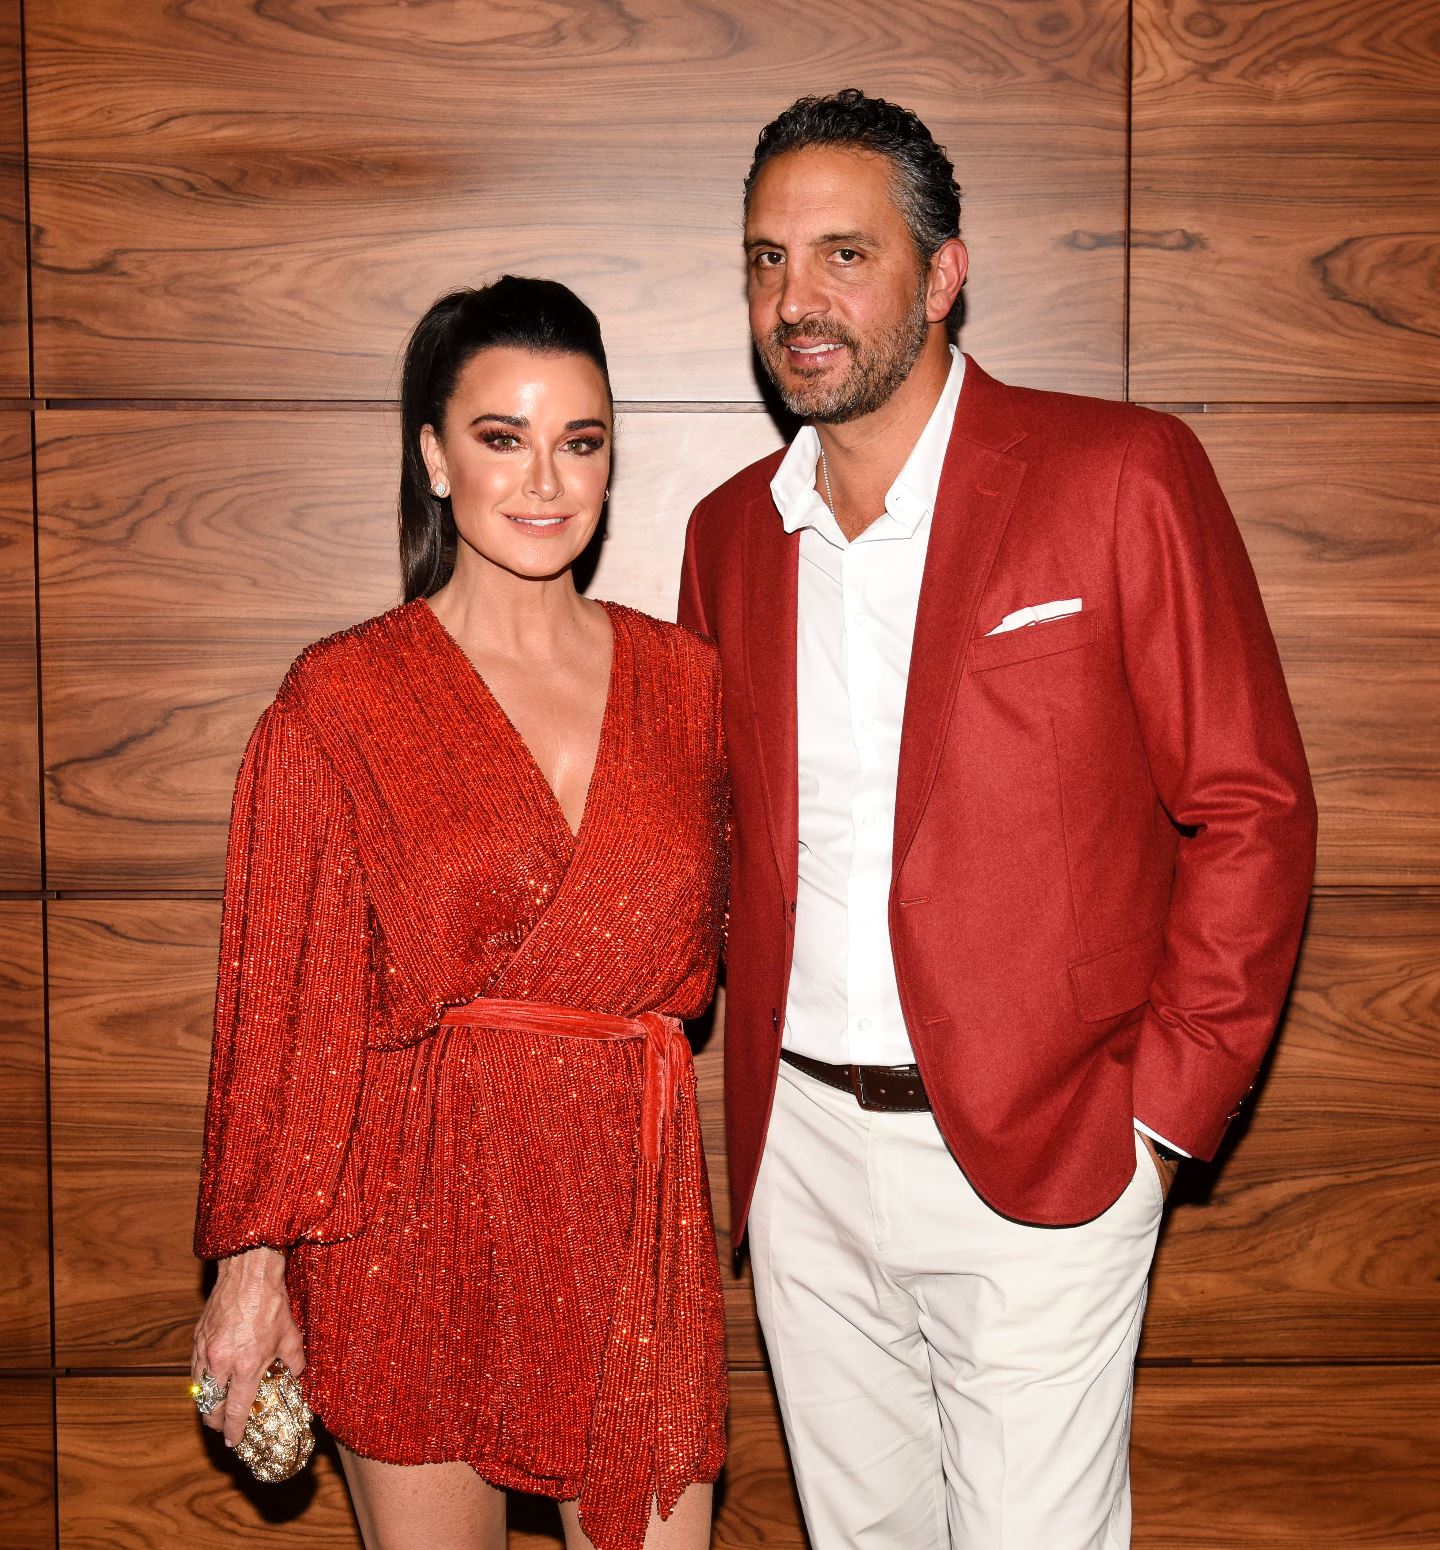 RHOBH's Kyle Richards Hints at What Led to Split From Mauricio Umansky, and Discusses Facing Depression After BFF's Death, Plus Kyle & Mauricio Reunite With Daughters in L.A.